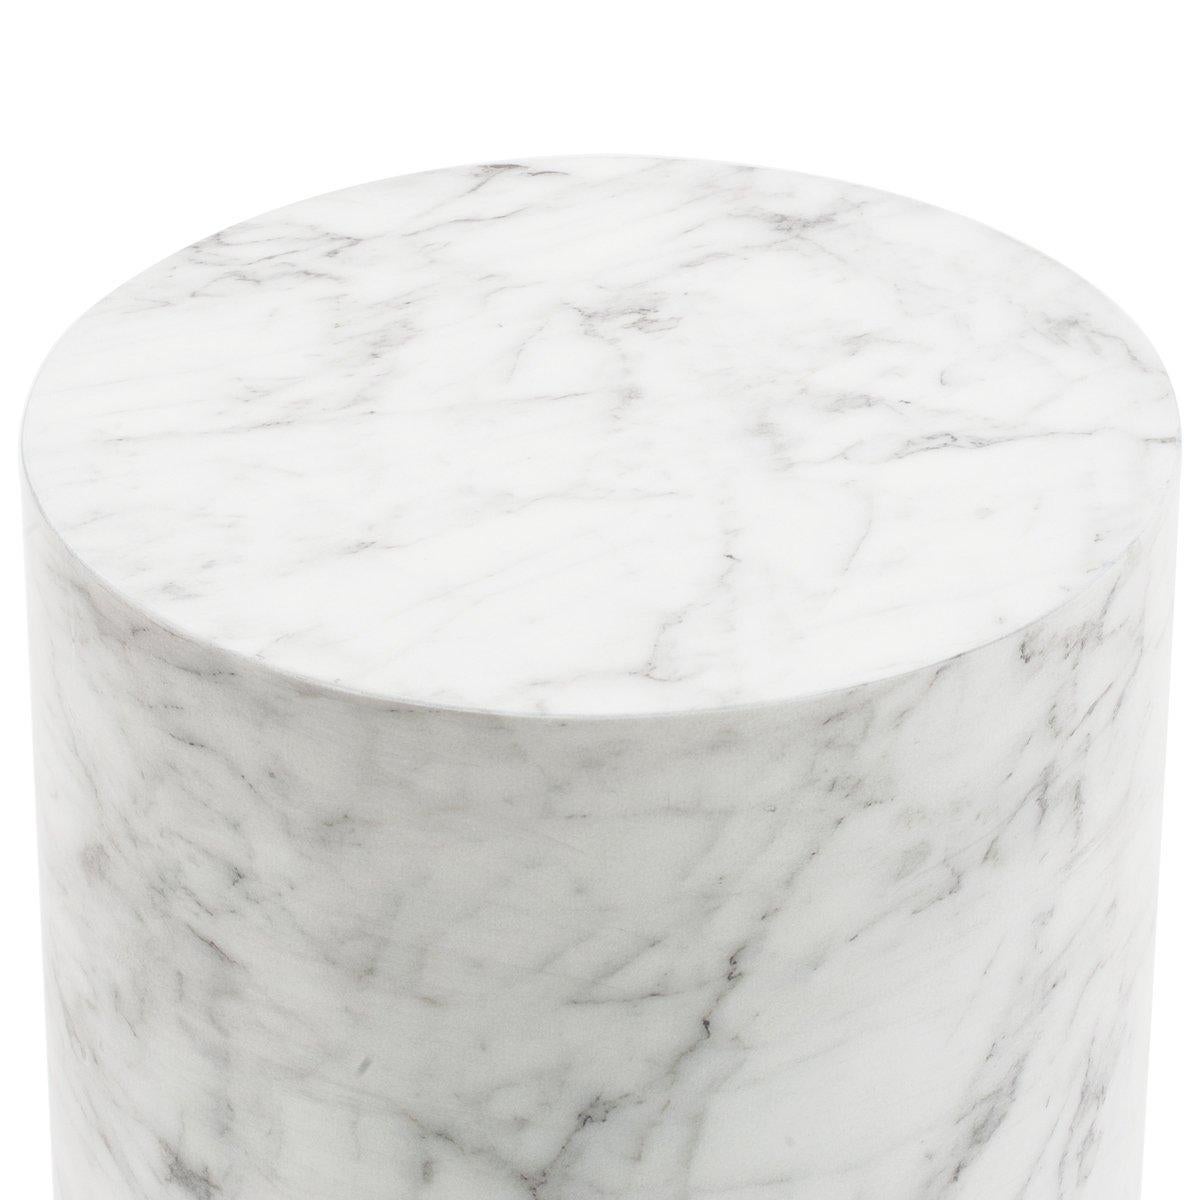 Stunning round side table in Carrera marble with a smooth, satin polished finish.